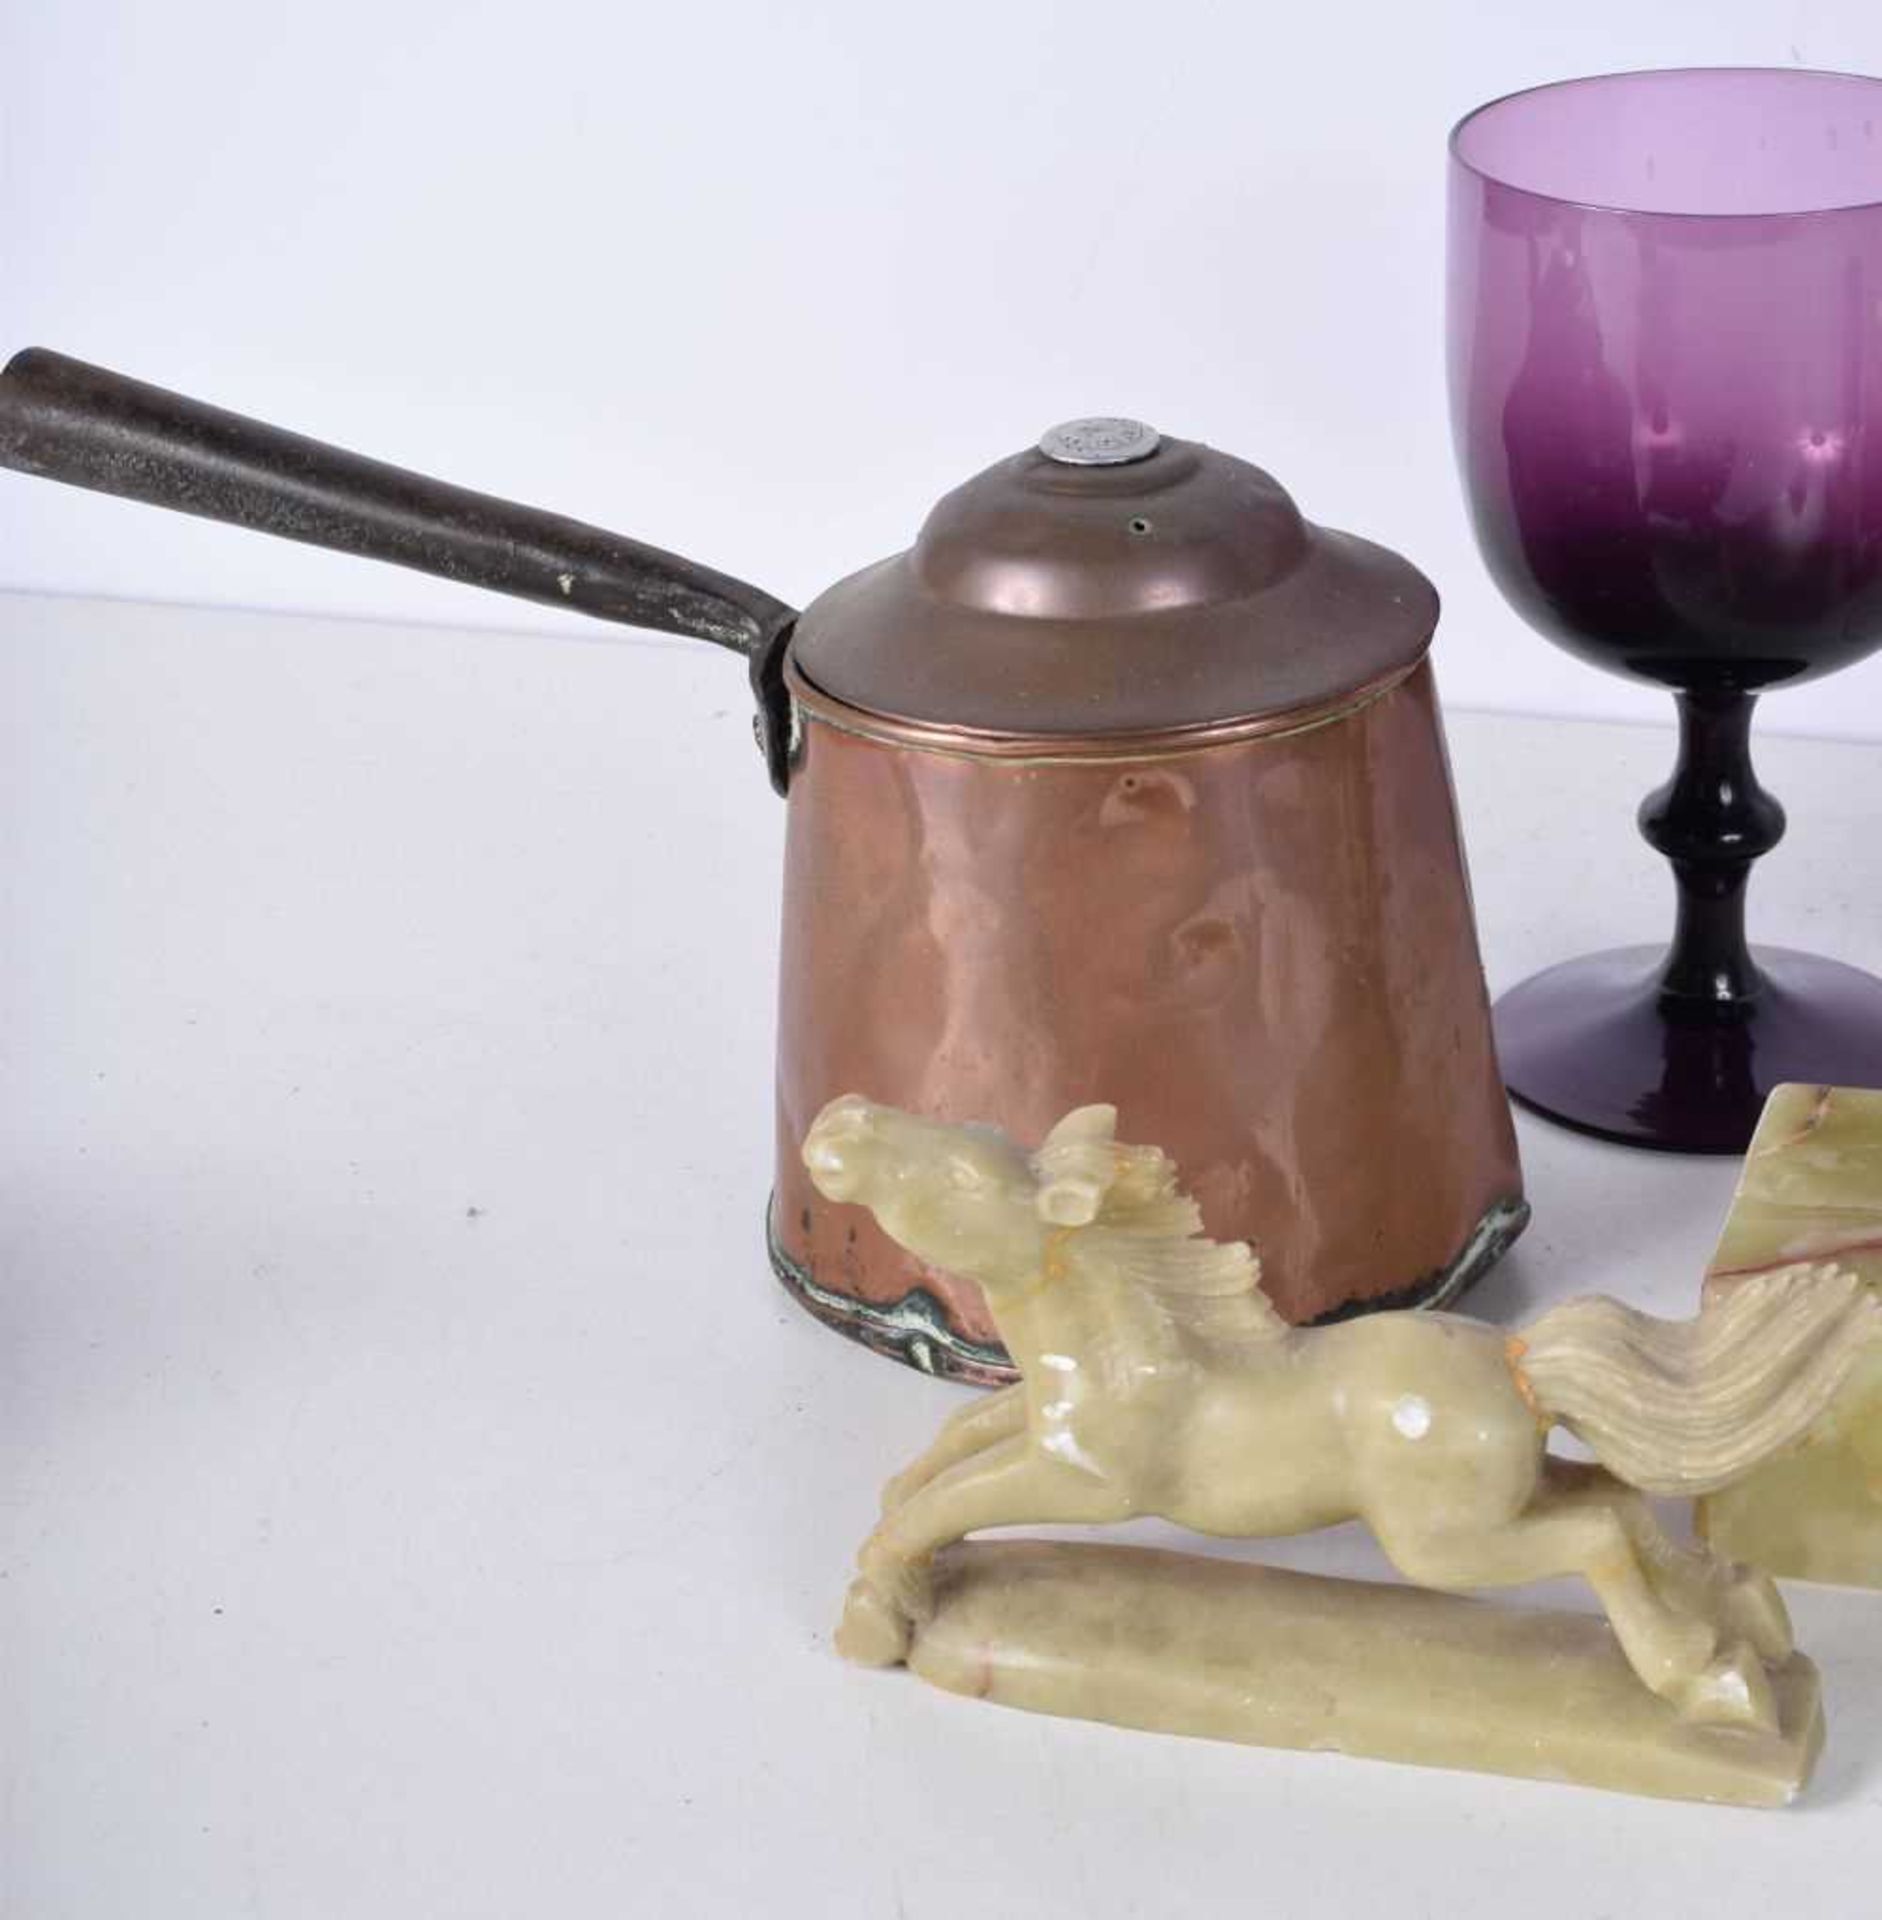 A collection of Onyx together with a Chinese Soapstone horse,a vintage Copper kettle and glassware - Image 4 of 8